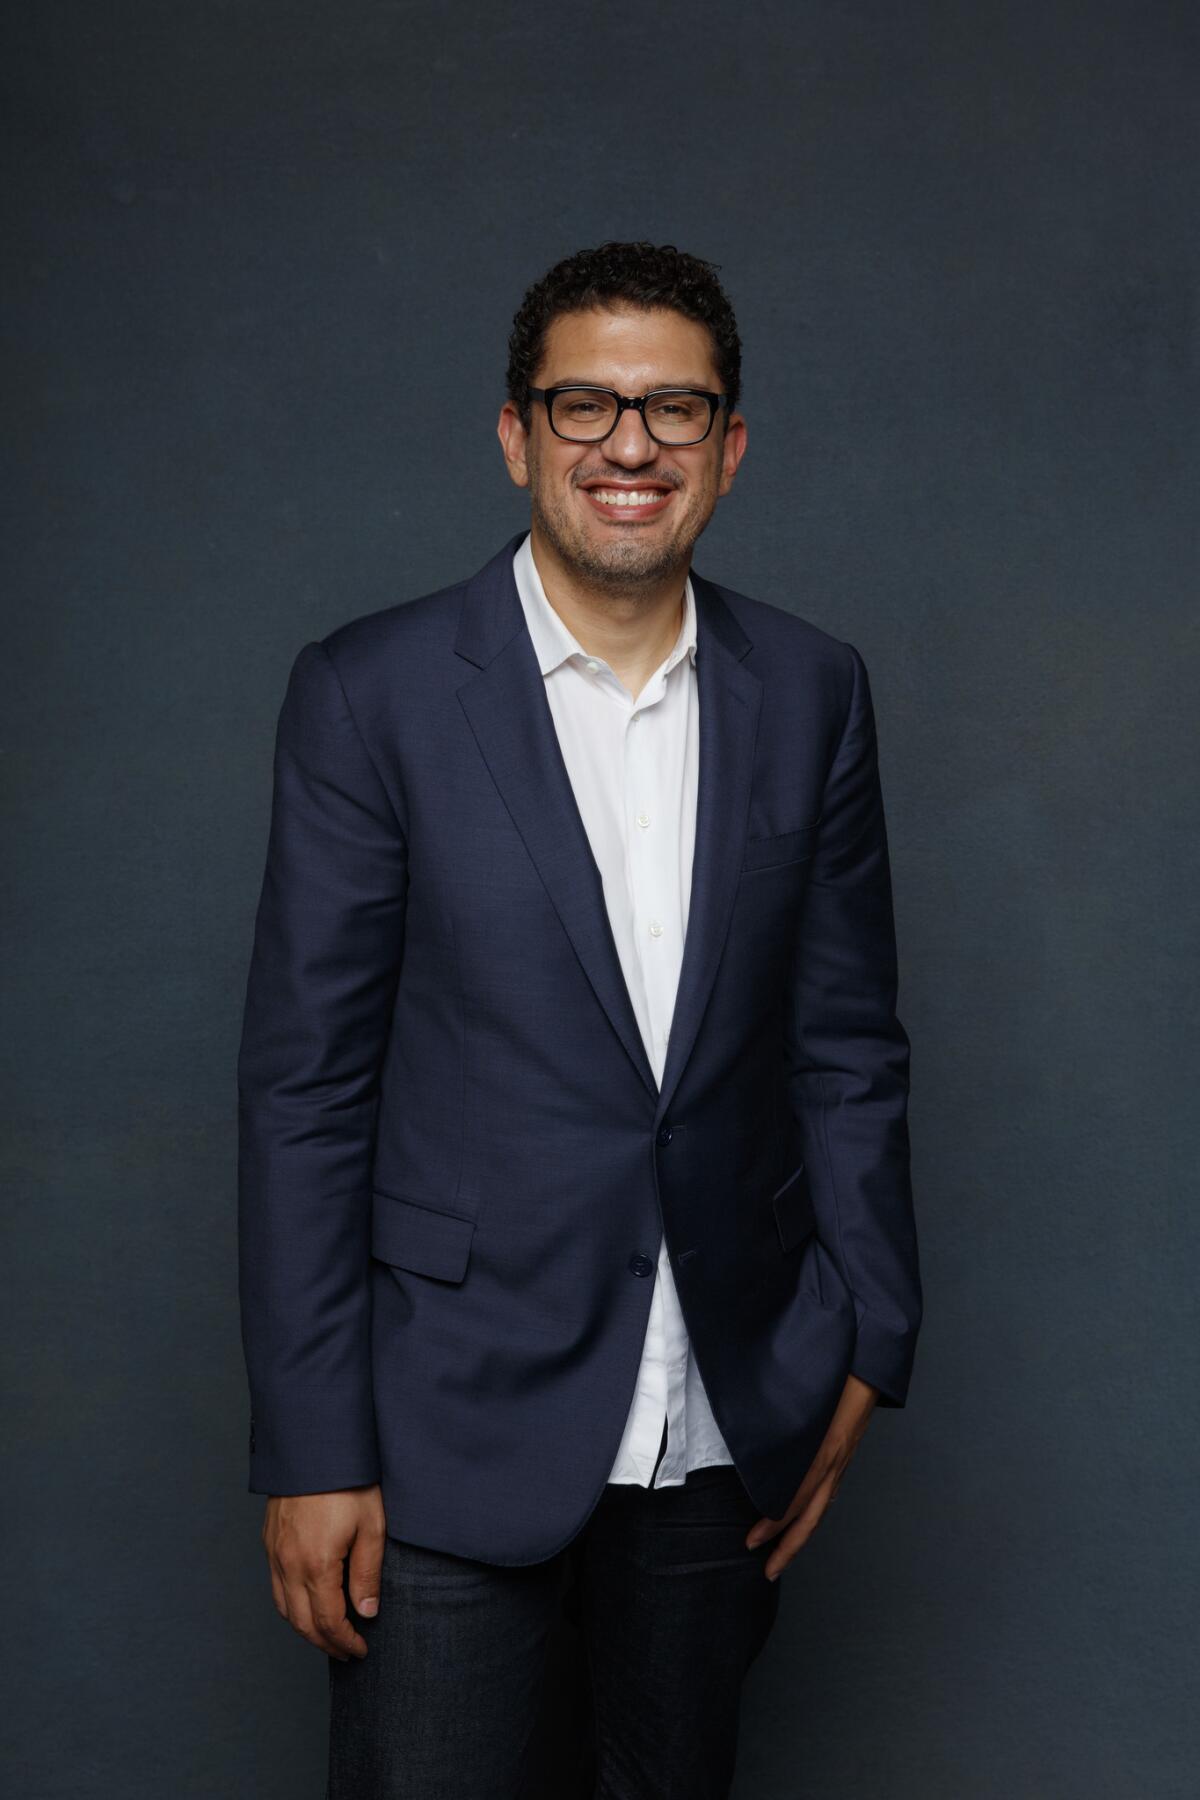 Sam Esmail, executive producer of the USA Network series “Mr. Robot” and the Amazon series “Homecoming.”